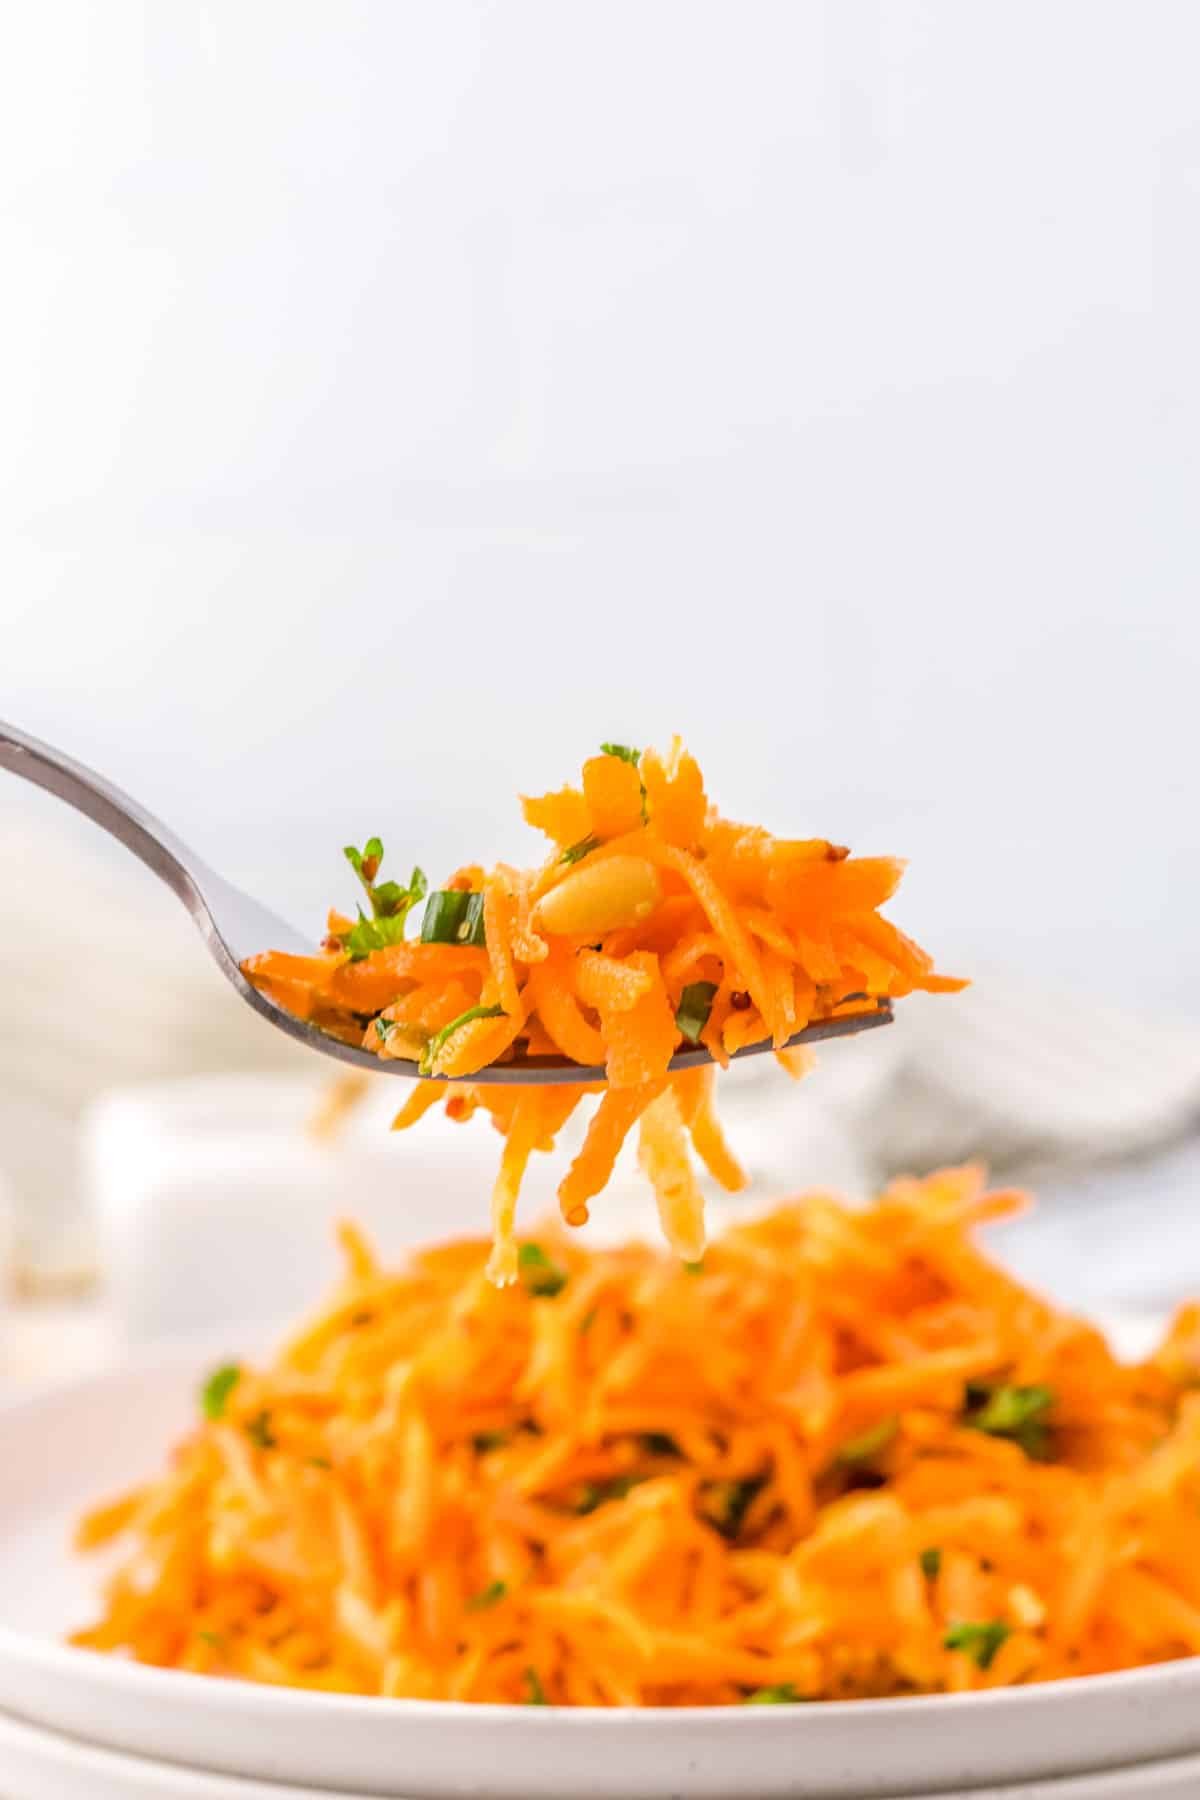 A fork picking up some of the finished Raw Carrot Salad.